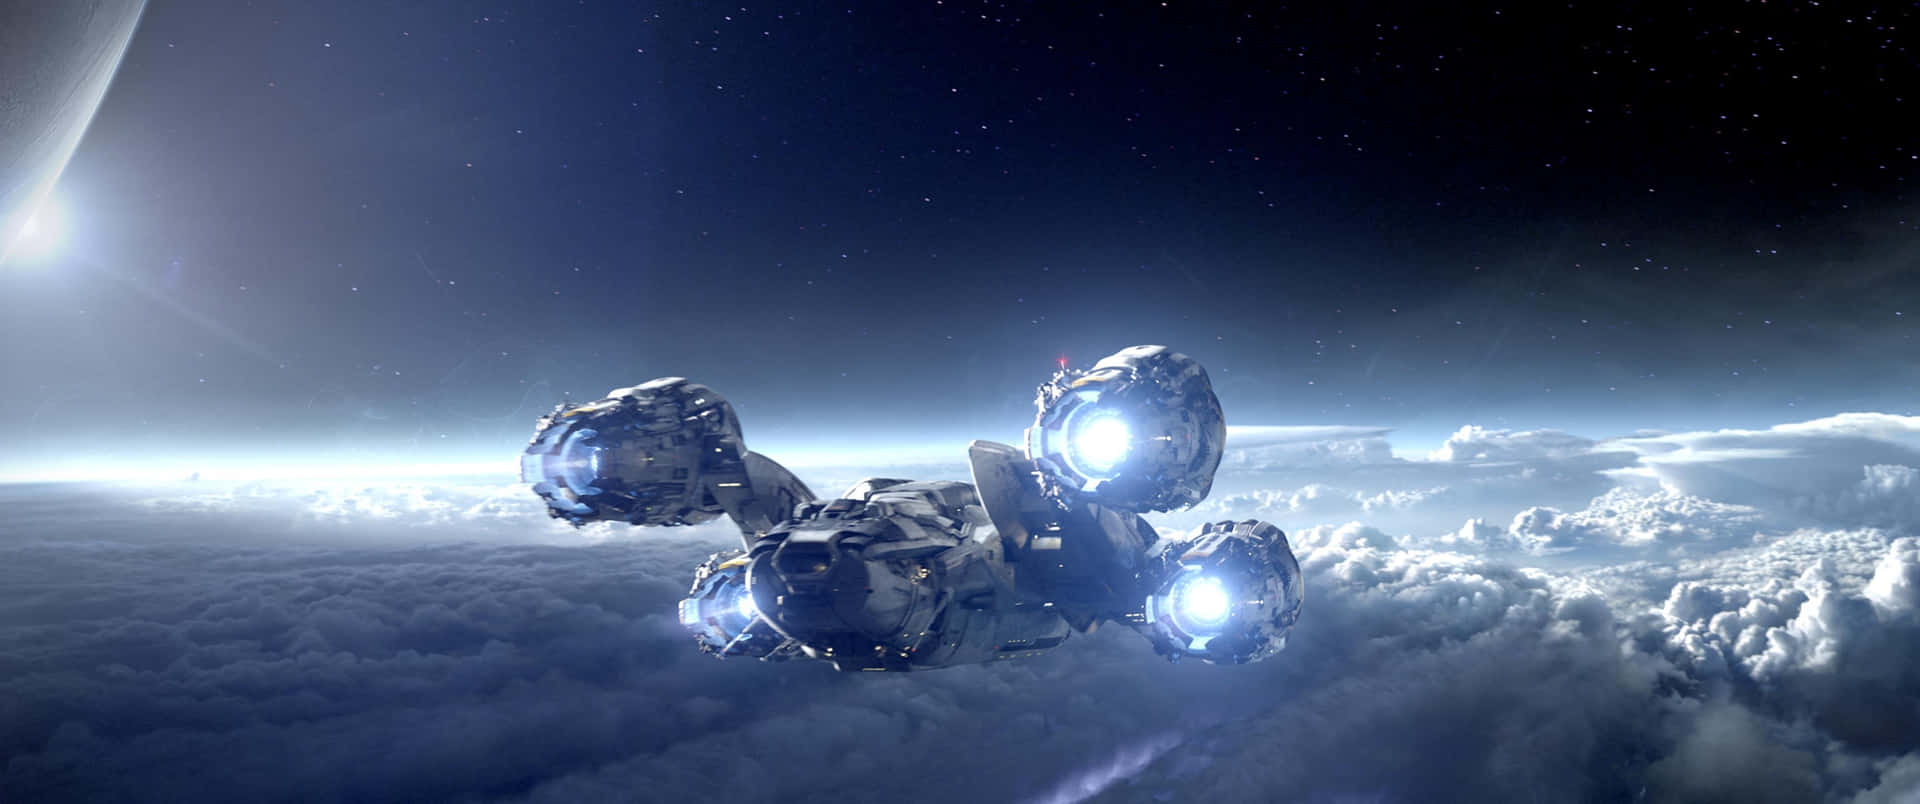 A Spaceship Flying In The Clouds Wallpaper